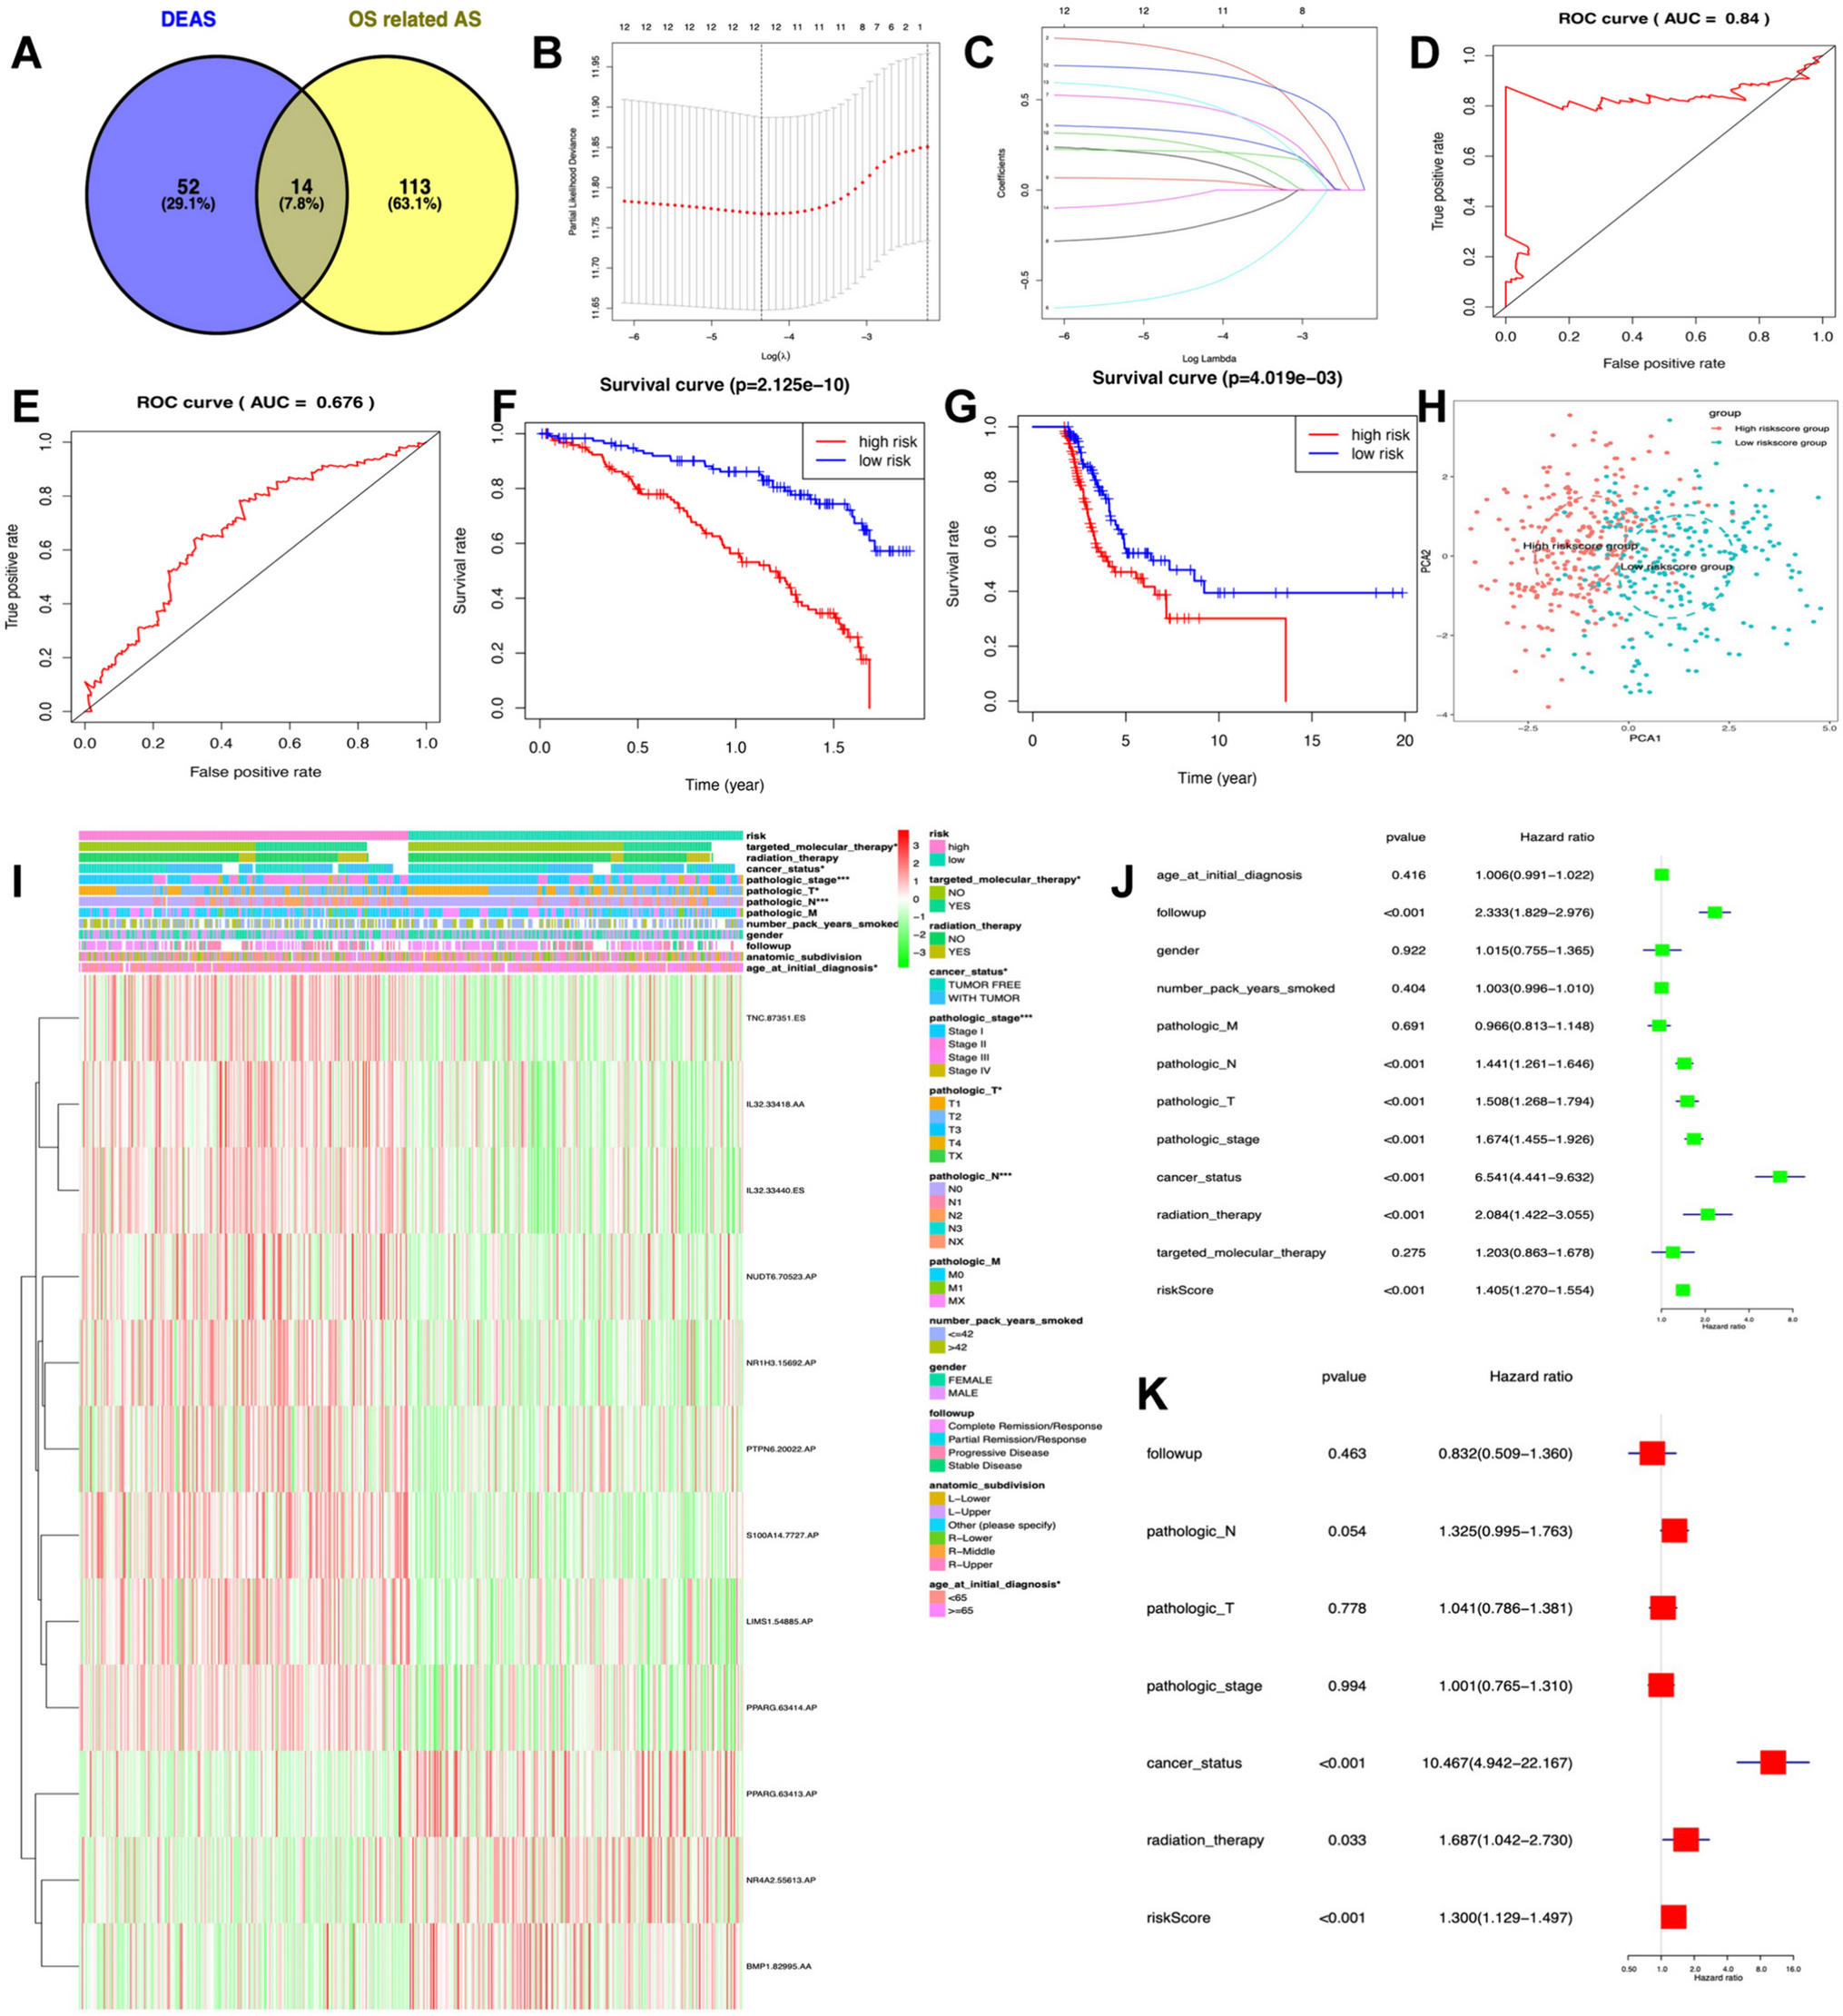 Clinically relevant immune subtypes based on alternative splicing landscape of immune-related genes for lung cancer advanced PPPM approach